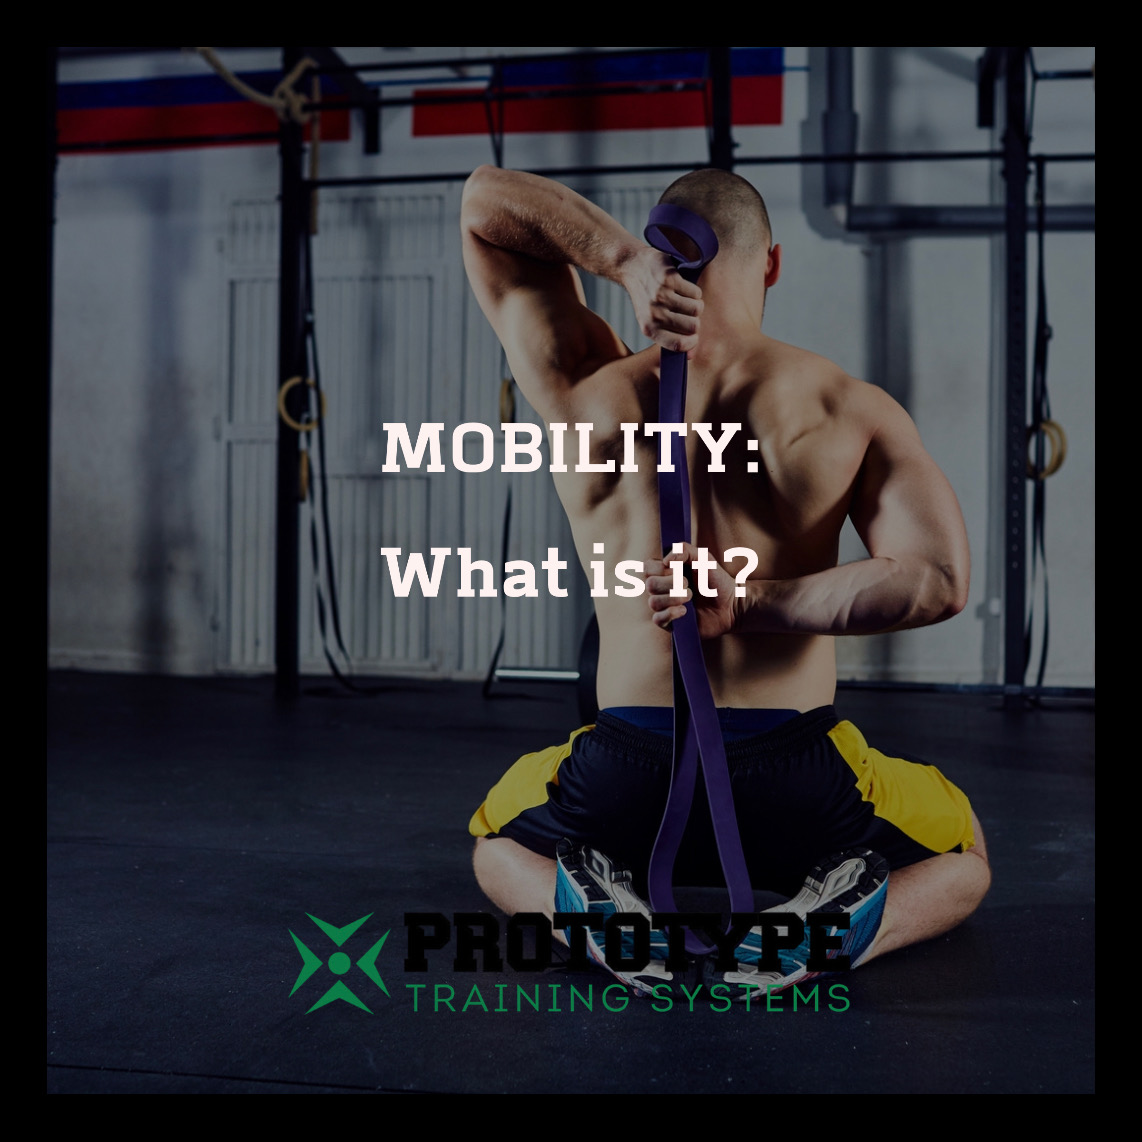 An all-in-one exercise, mobility and rehabilitation band